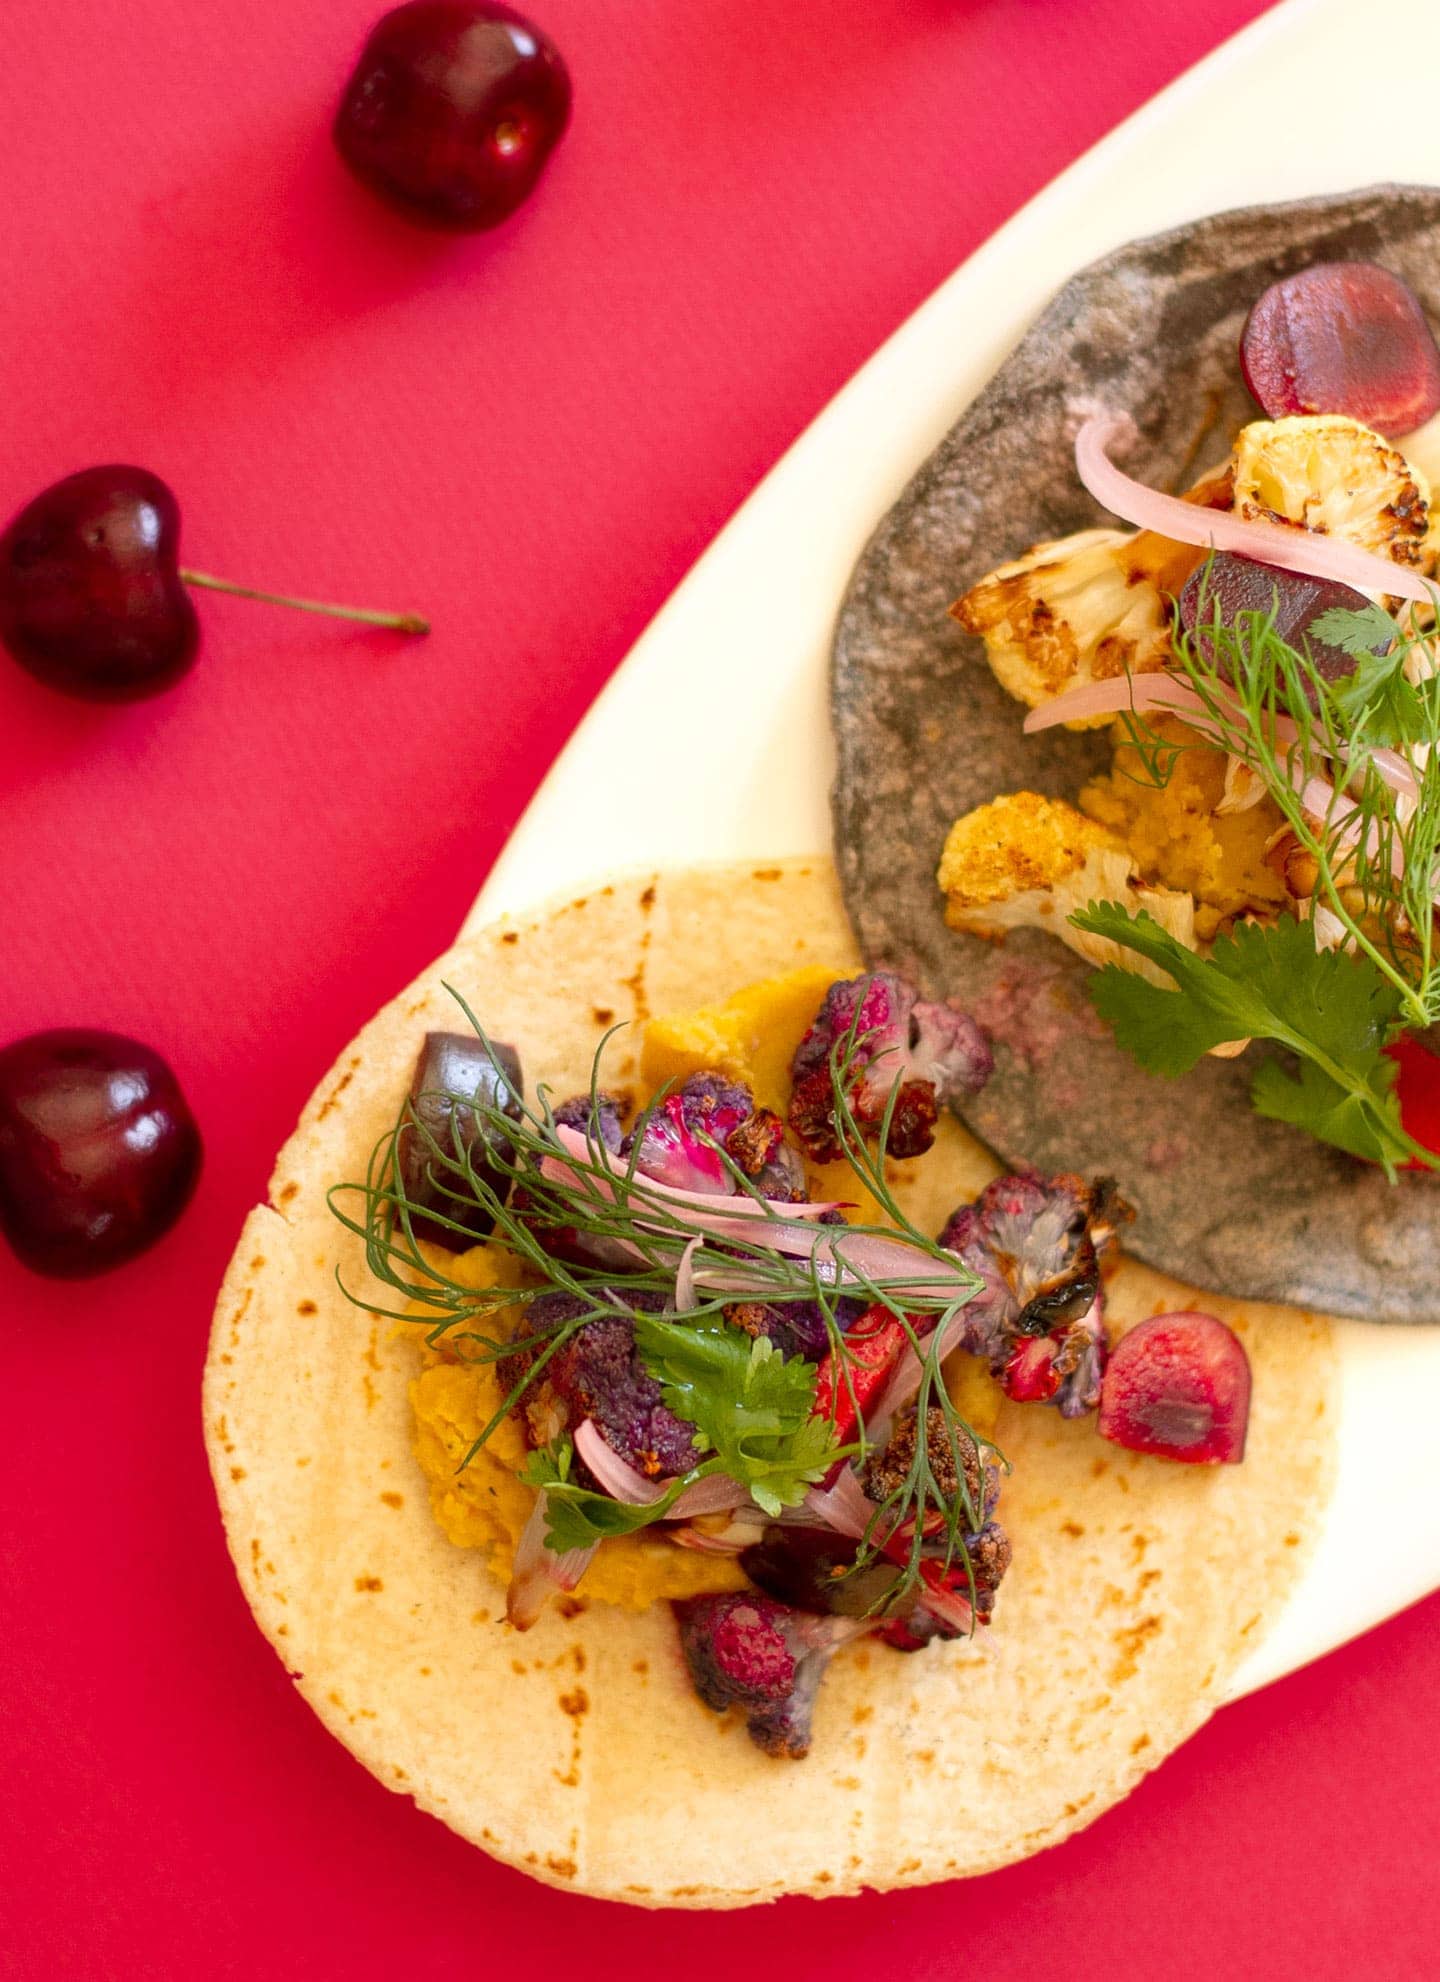 Top down view of tacos filled with roasted cauliflower, lentils, and fresh cherries on a white plate over a bright red background surface.